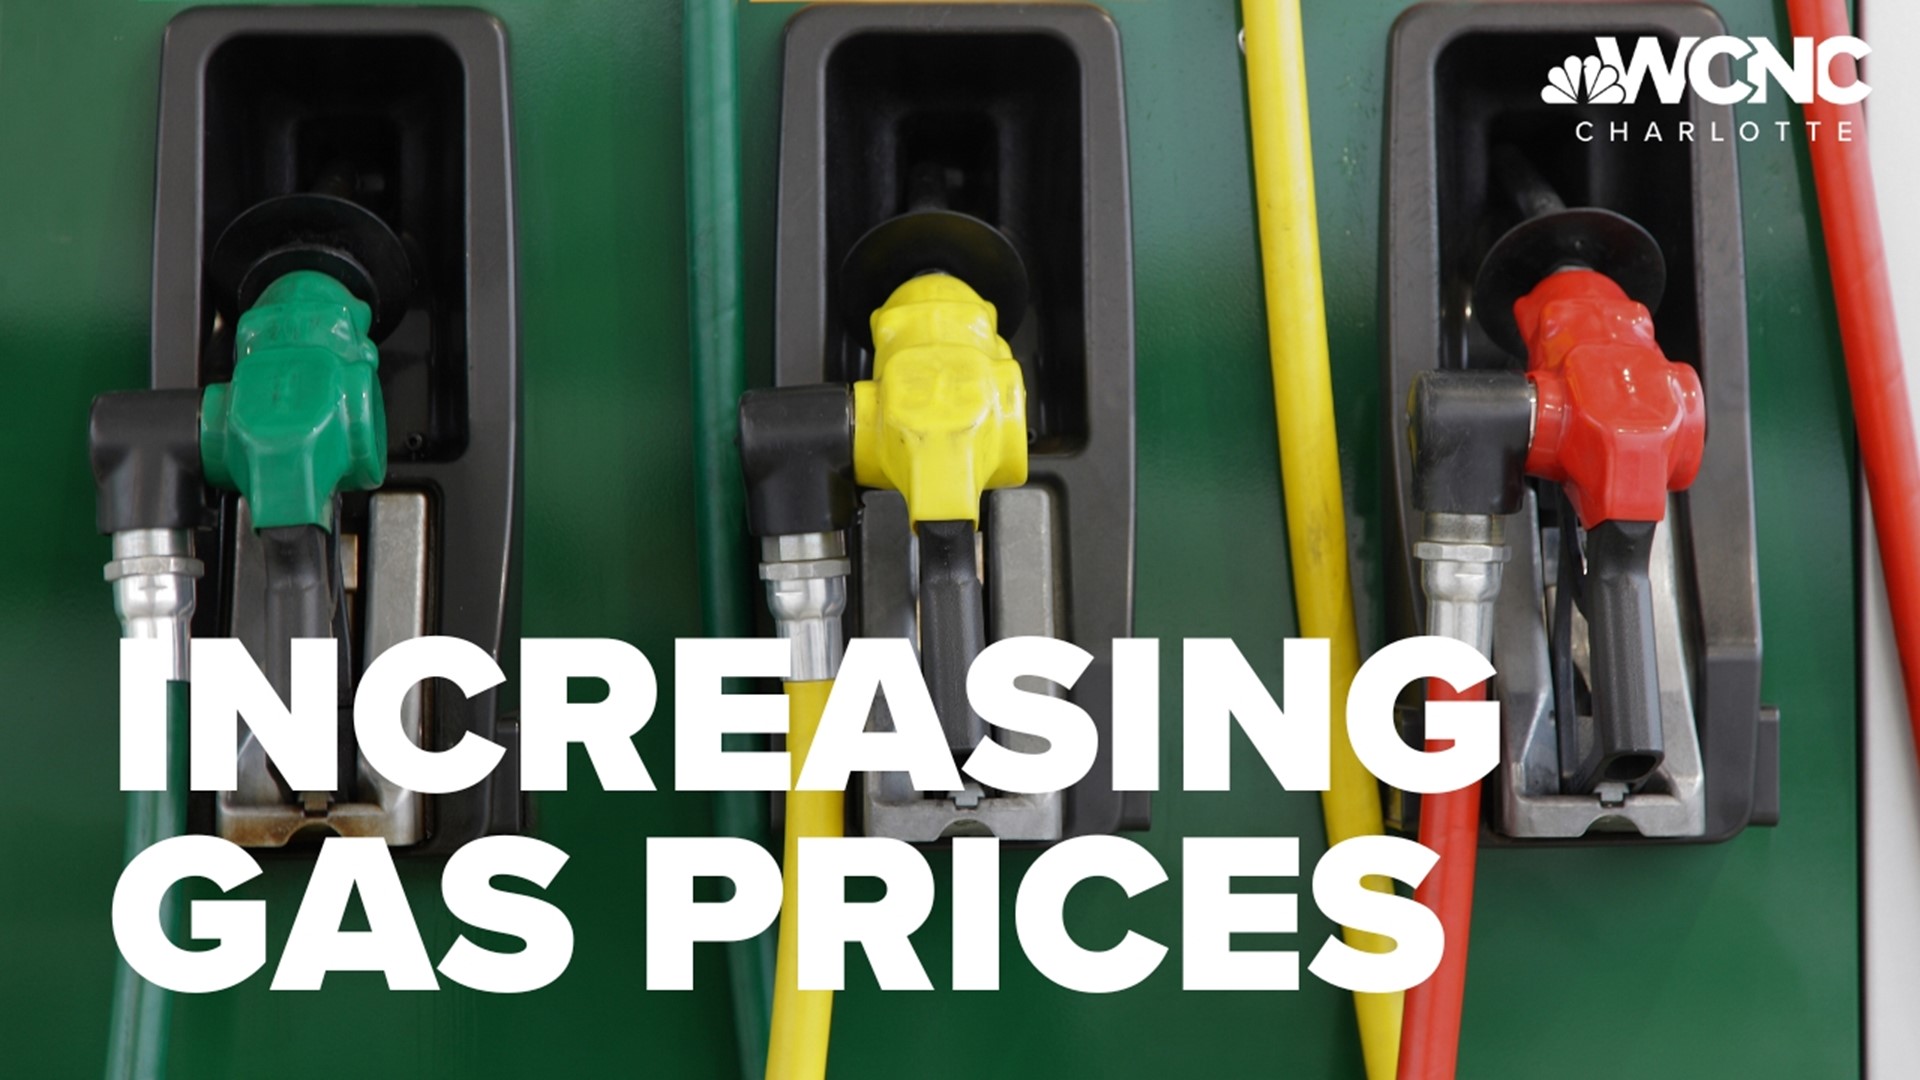 The heat wave that has caused temperatures to rise across the country is also raising gas prices.